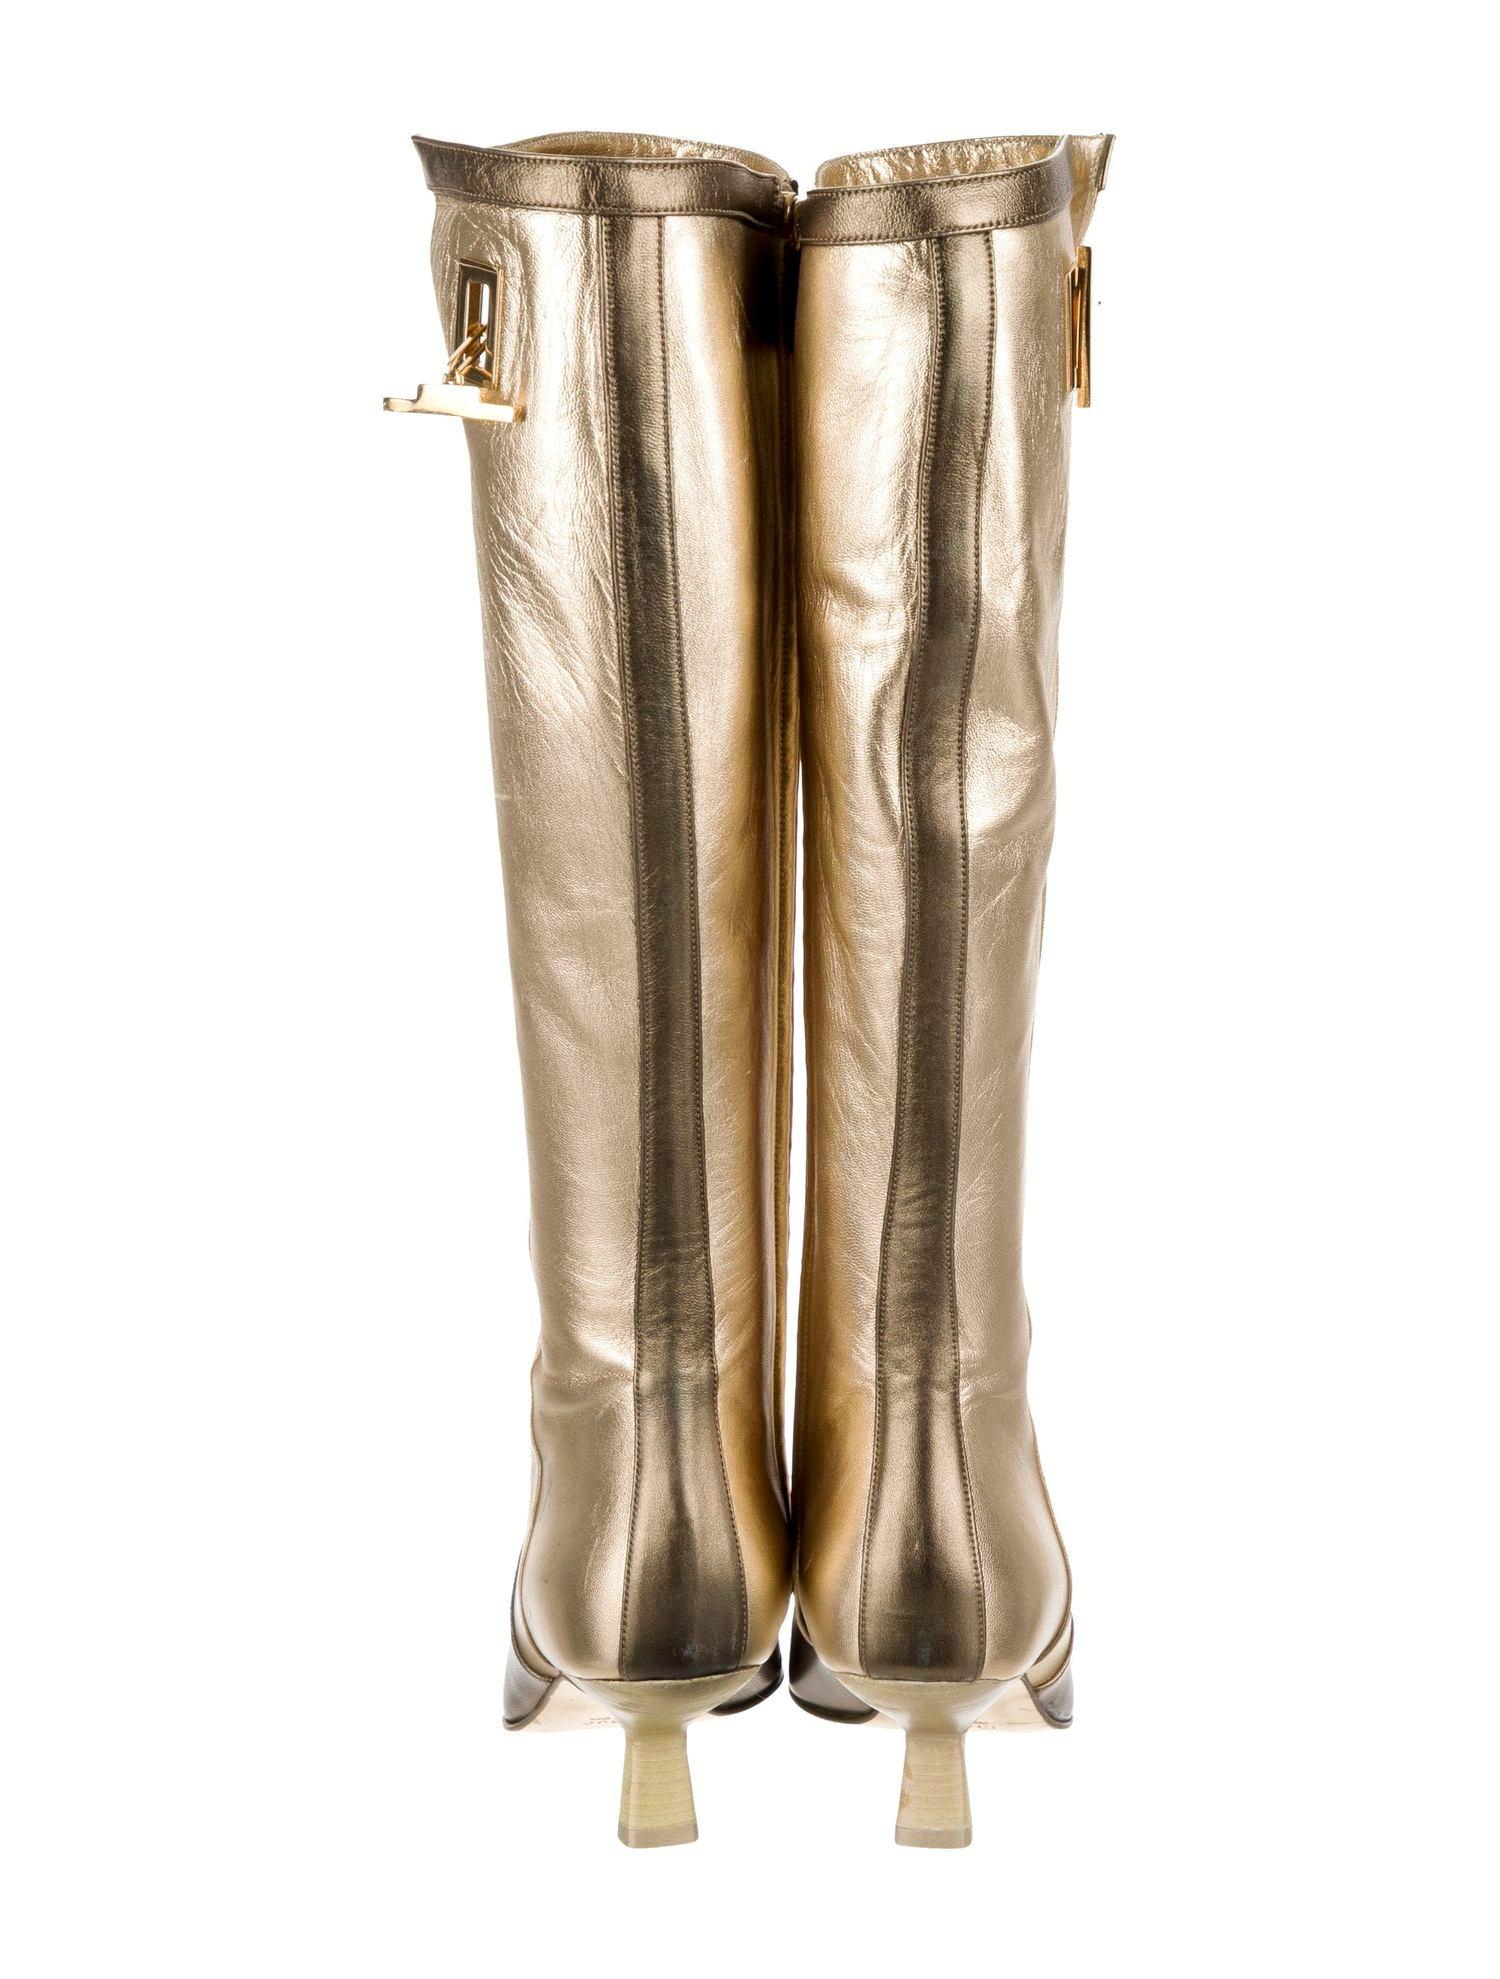 
COLLECTOR'S ITEM

GUCCI COLLECTION BY TOM FORD FOR FALL / WINTER 2000

Gold & Bronze Leather boots
These boots are part of the permanent collection of the Phoenix Art Museum, gift of Neiman Marcus and were also featured in the Gucci cataloge in